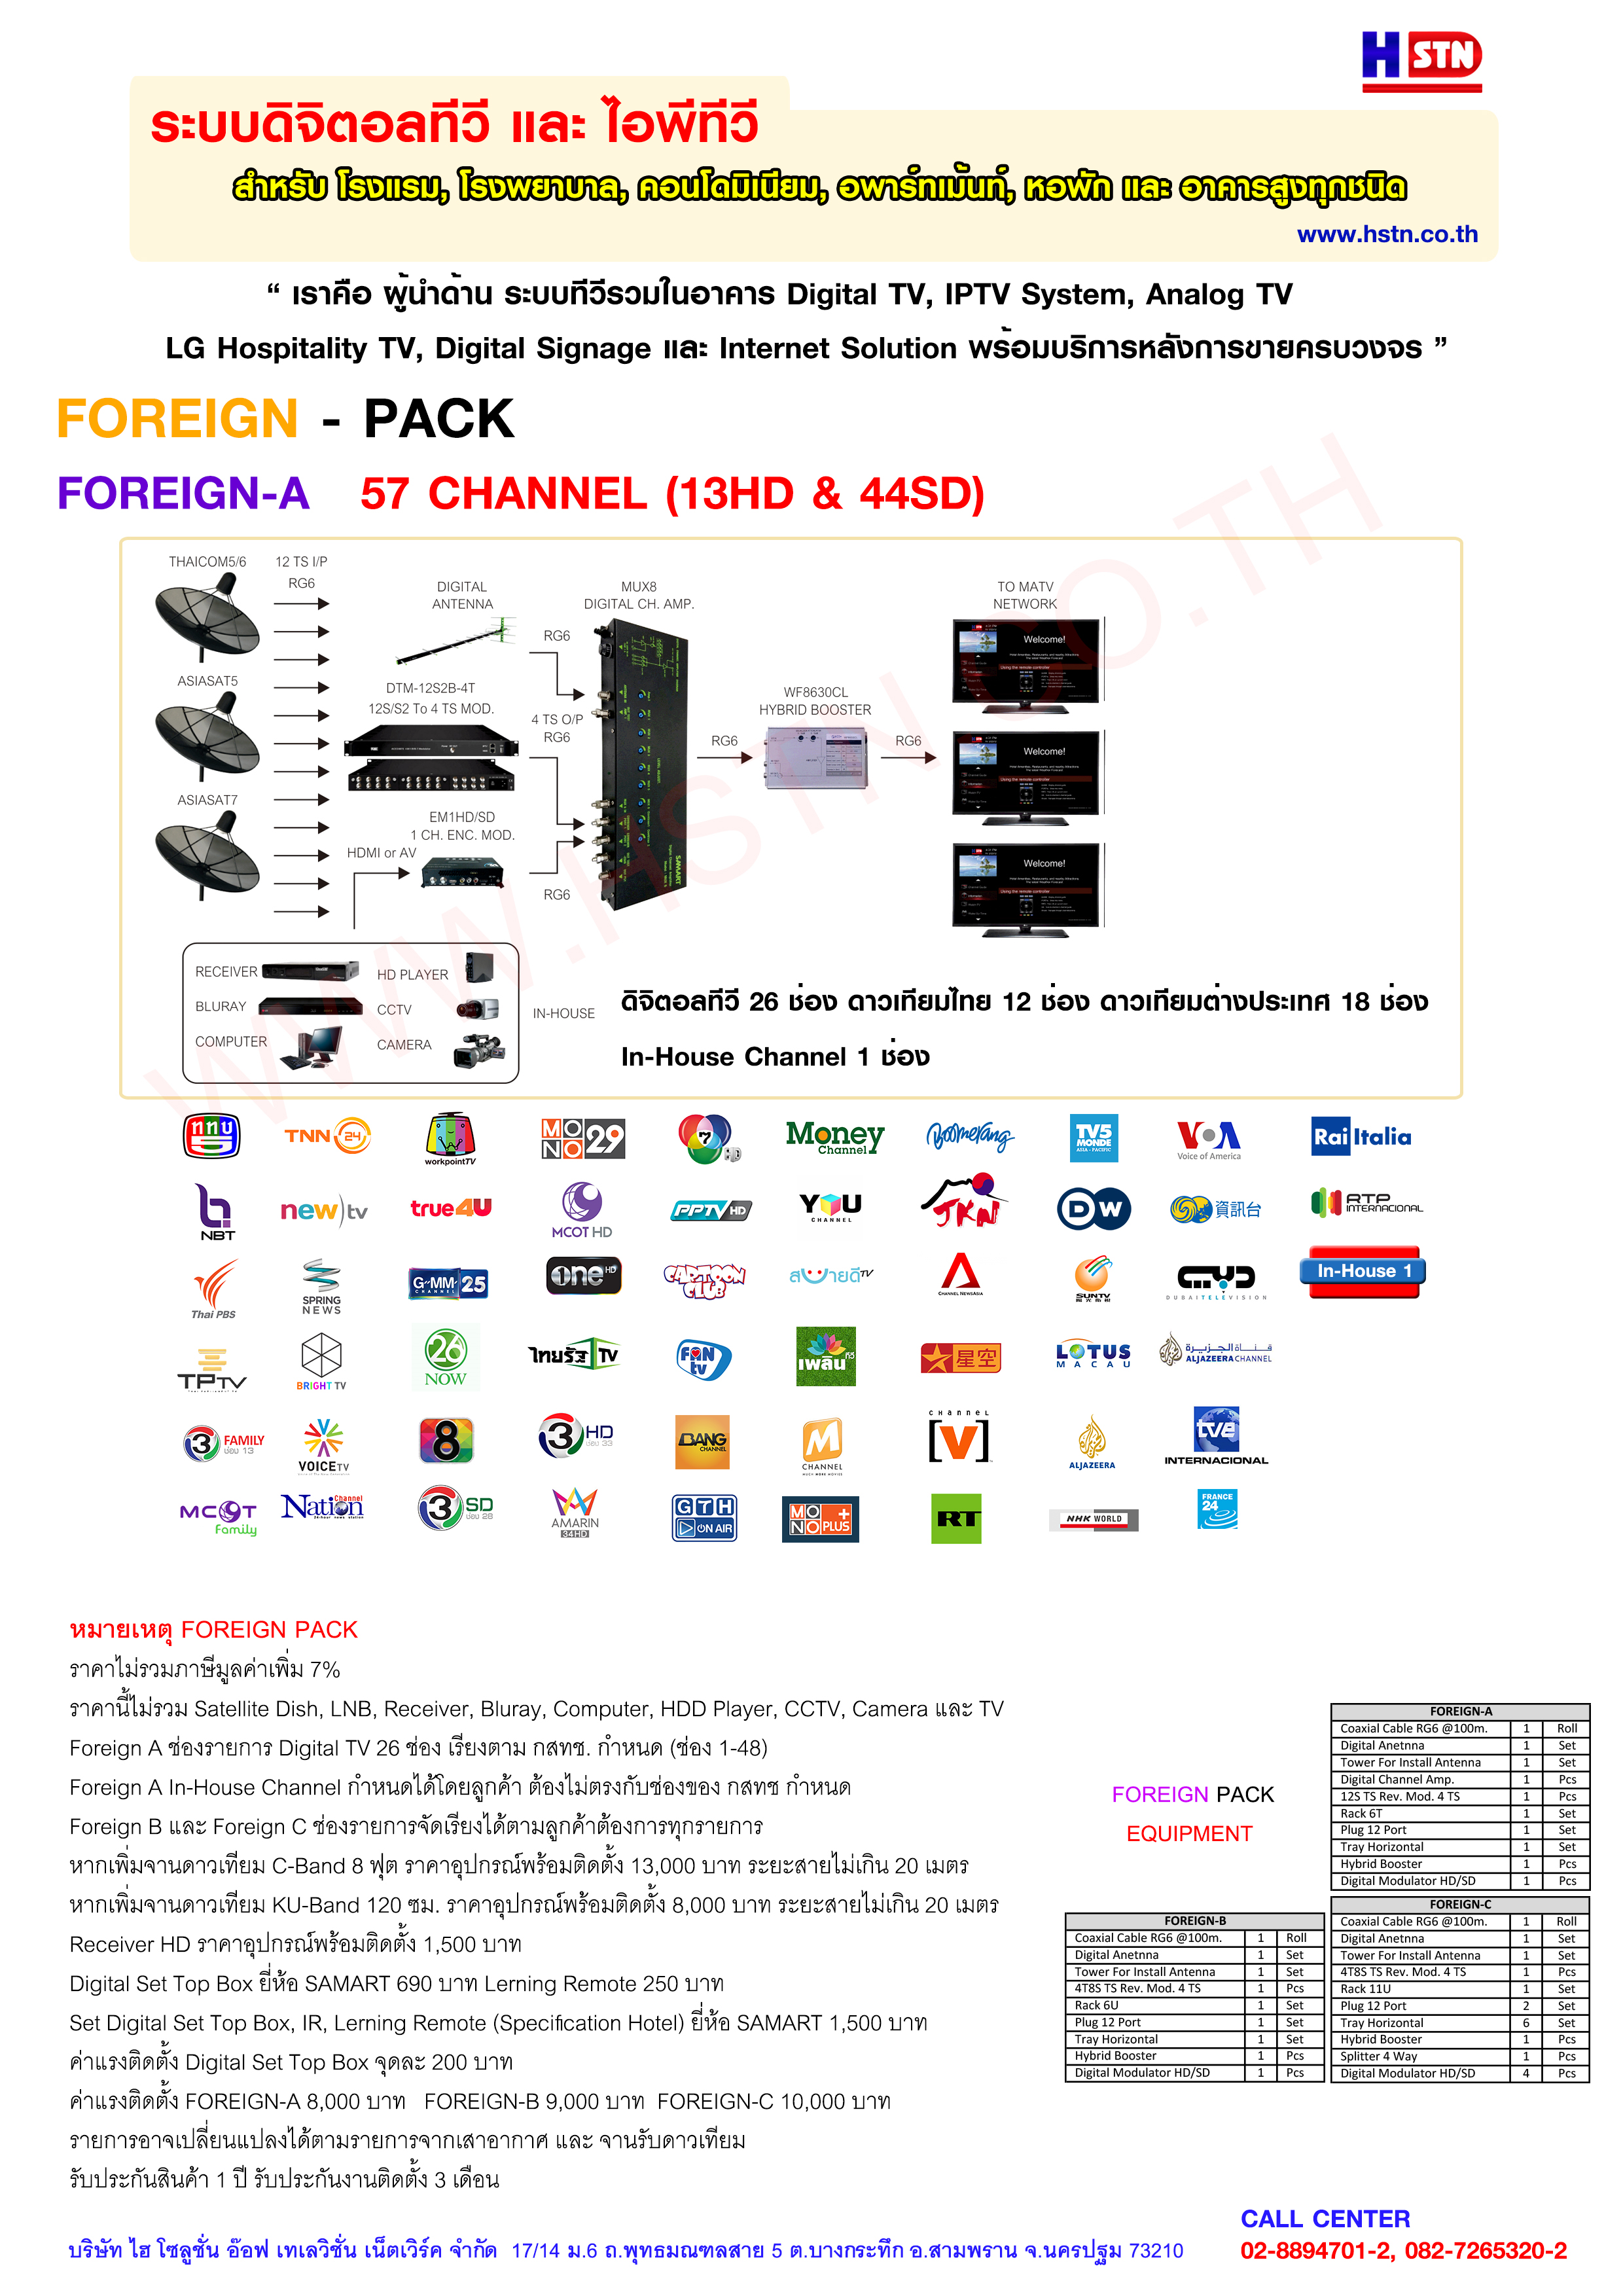 Digital TV Solution FOREIGN Pack by HSTN